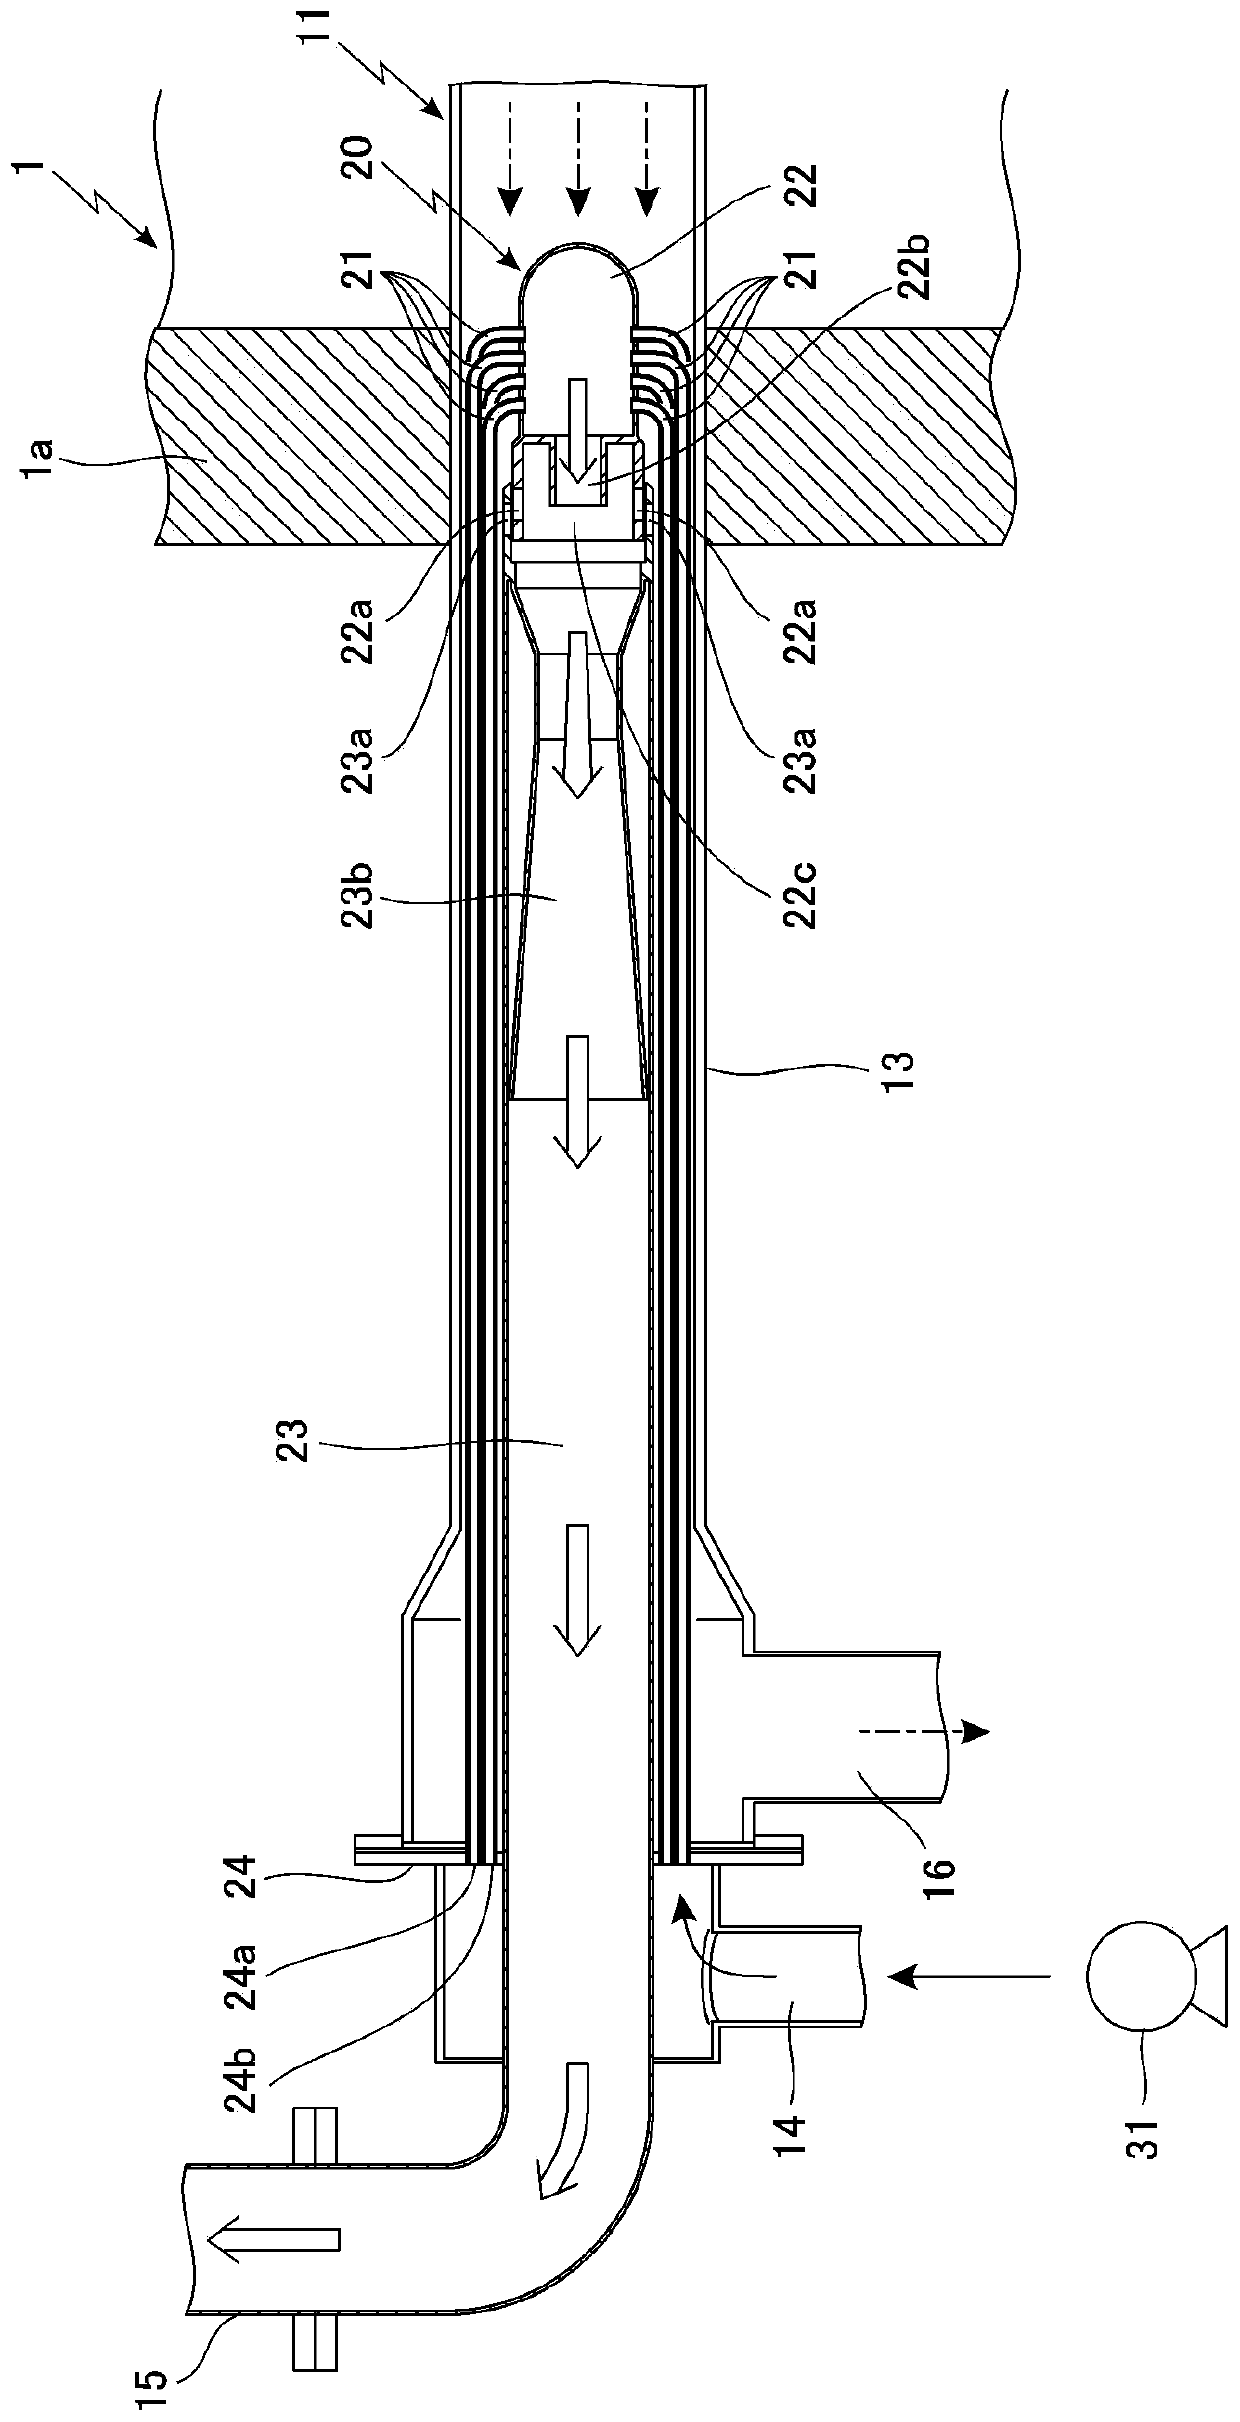 Recuperator and radiant tube type heating apparatus